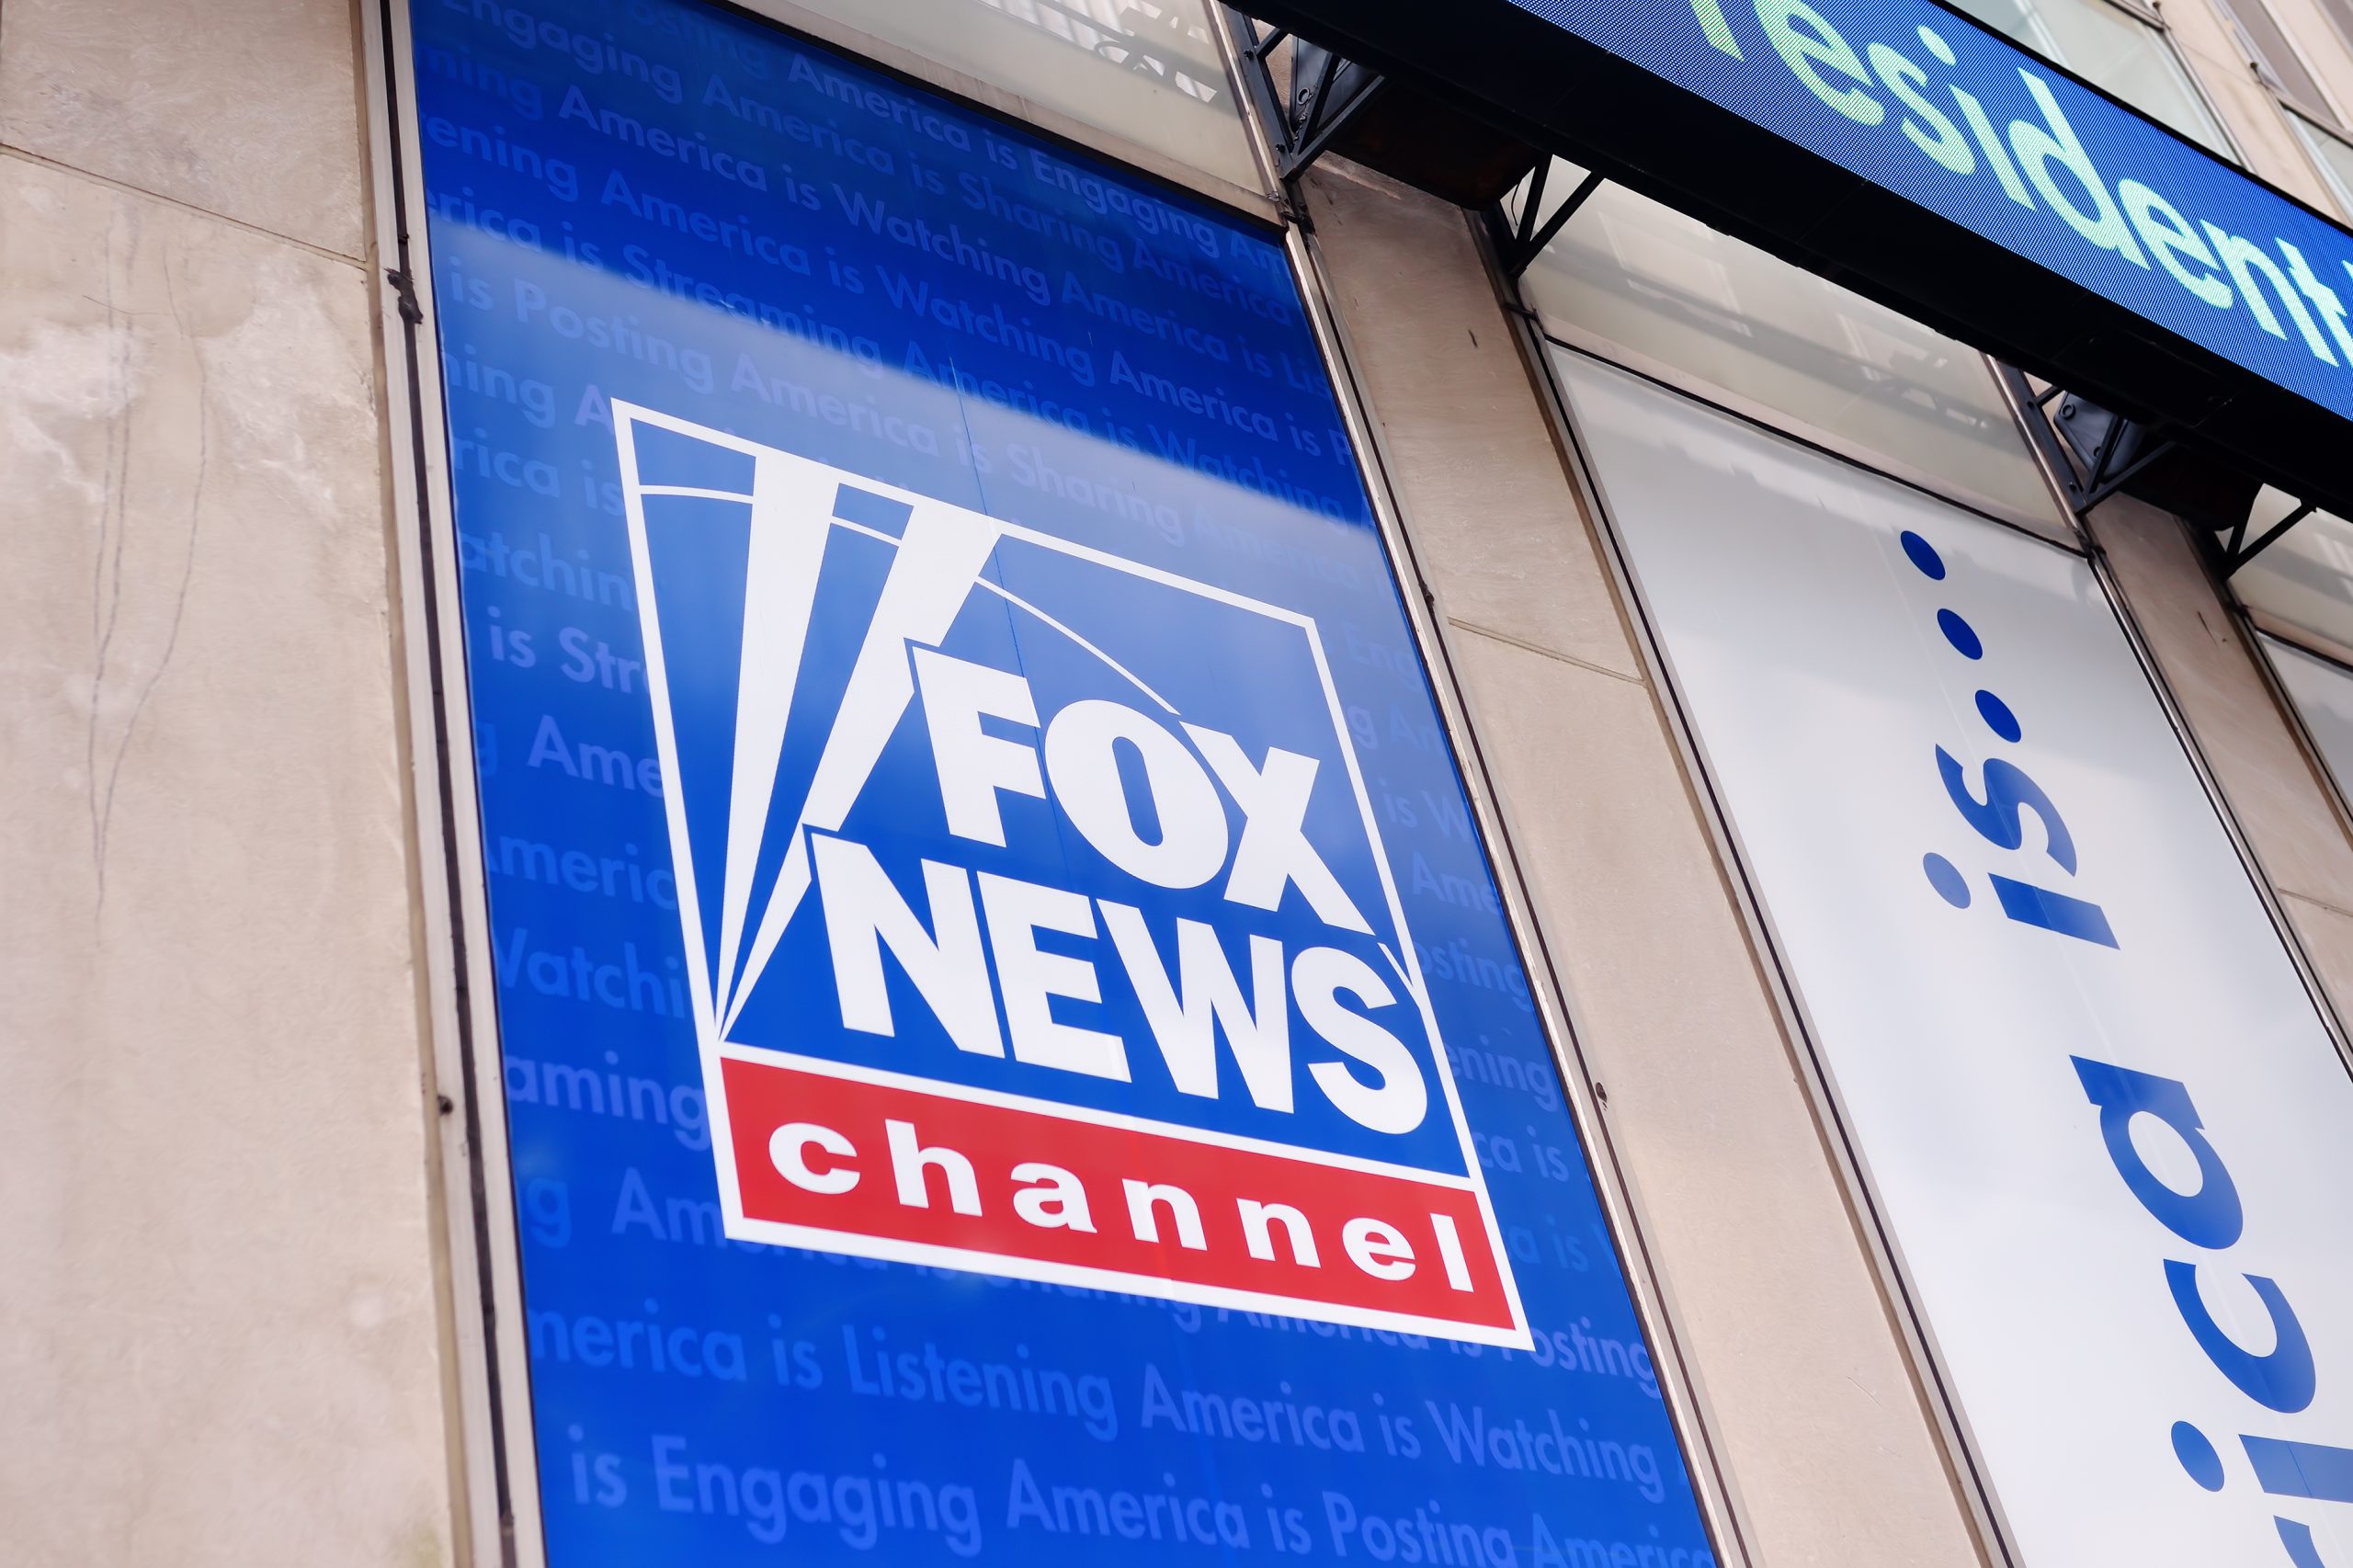 Image of Fox News Channel sign outside of building.